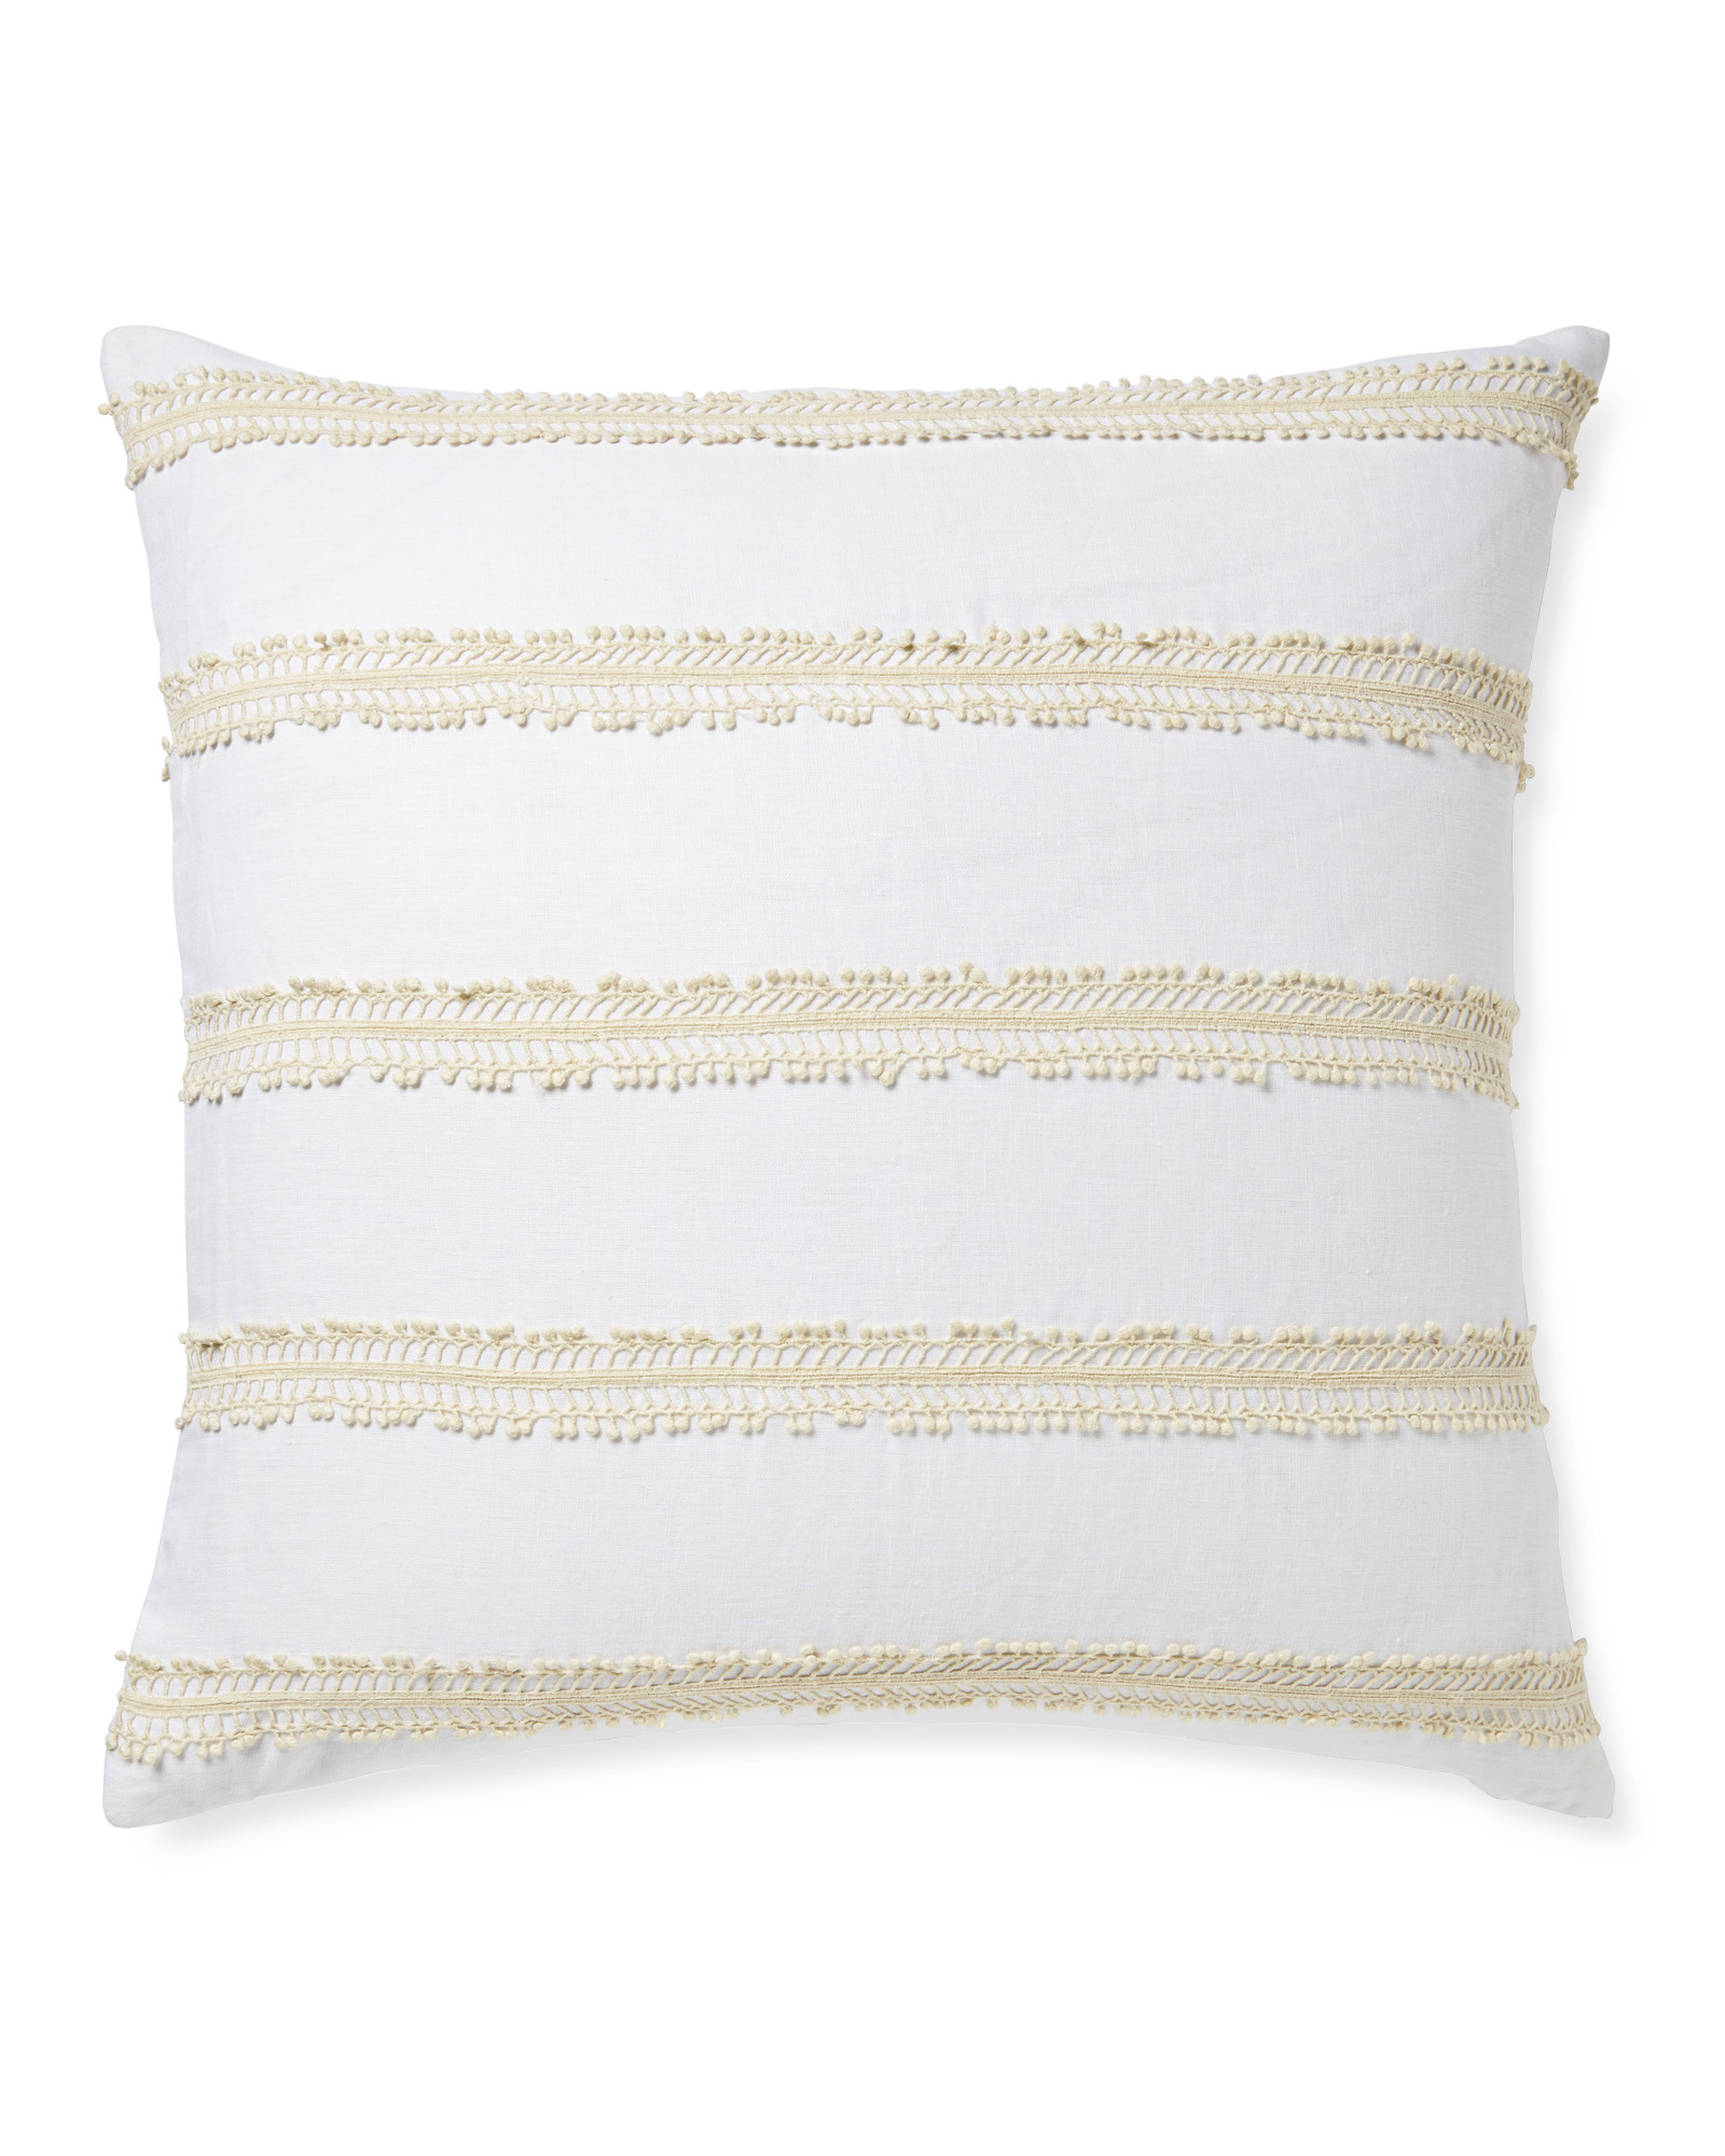 Sevilla Pillow Cover: White/Ivory - Serena and Lily